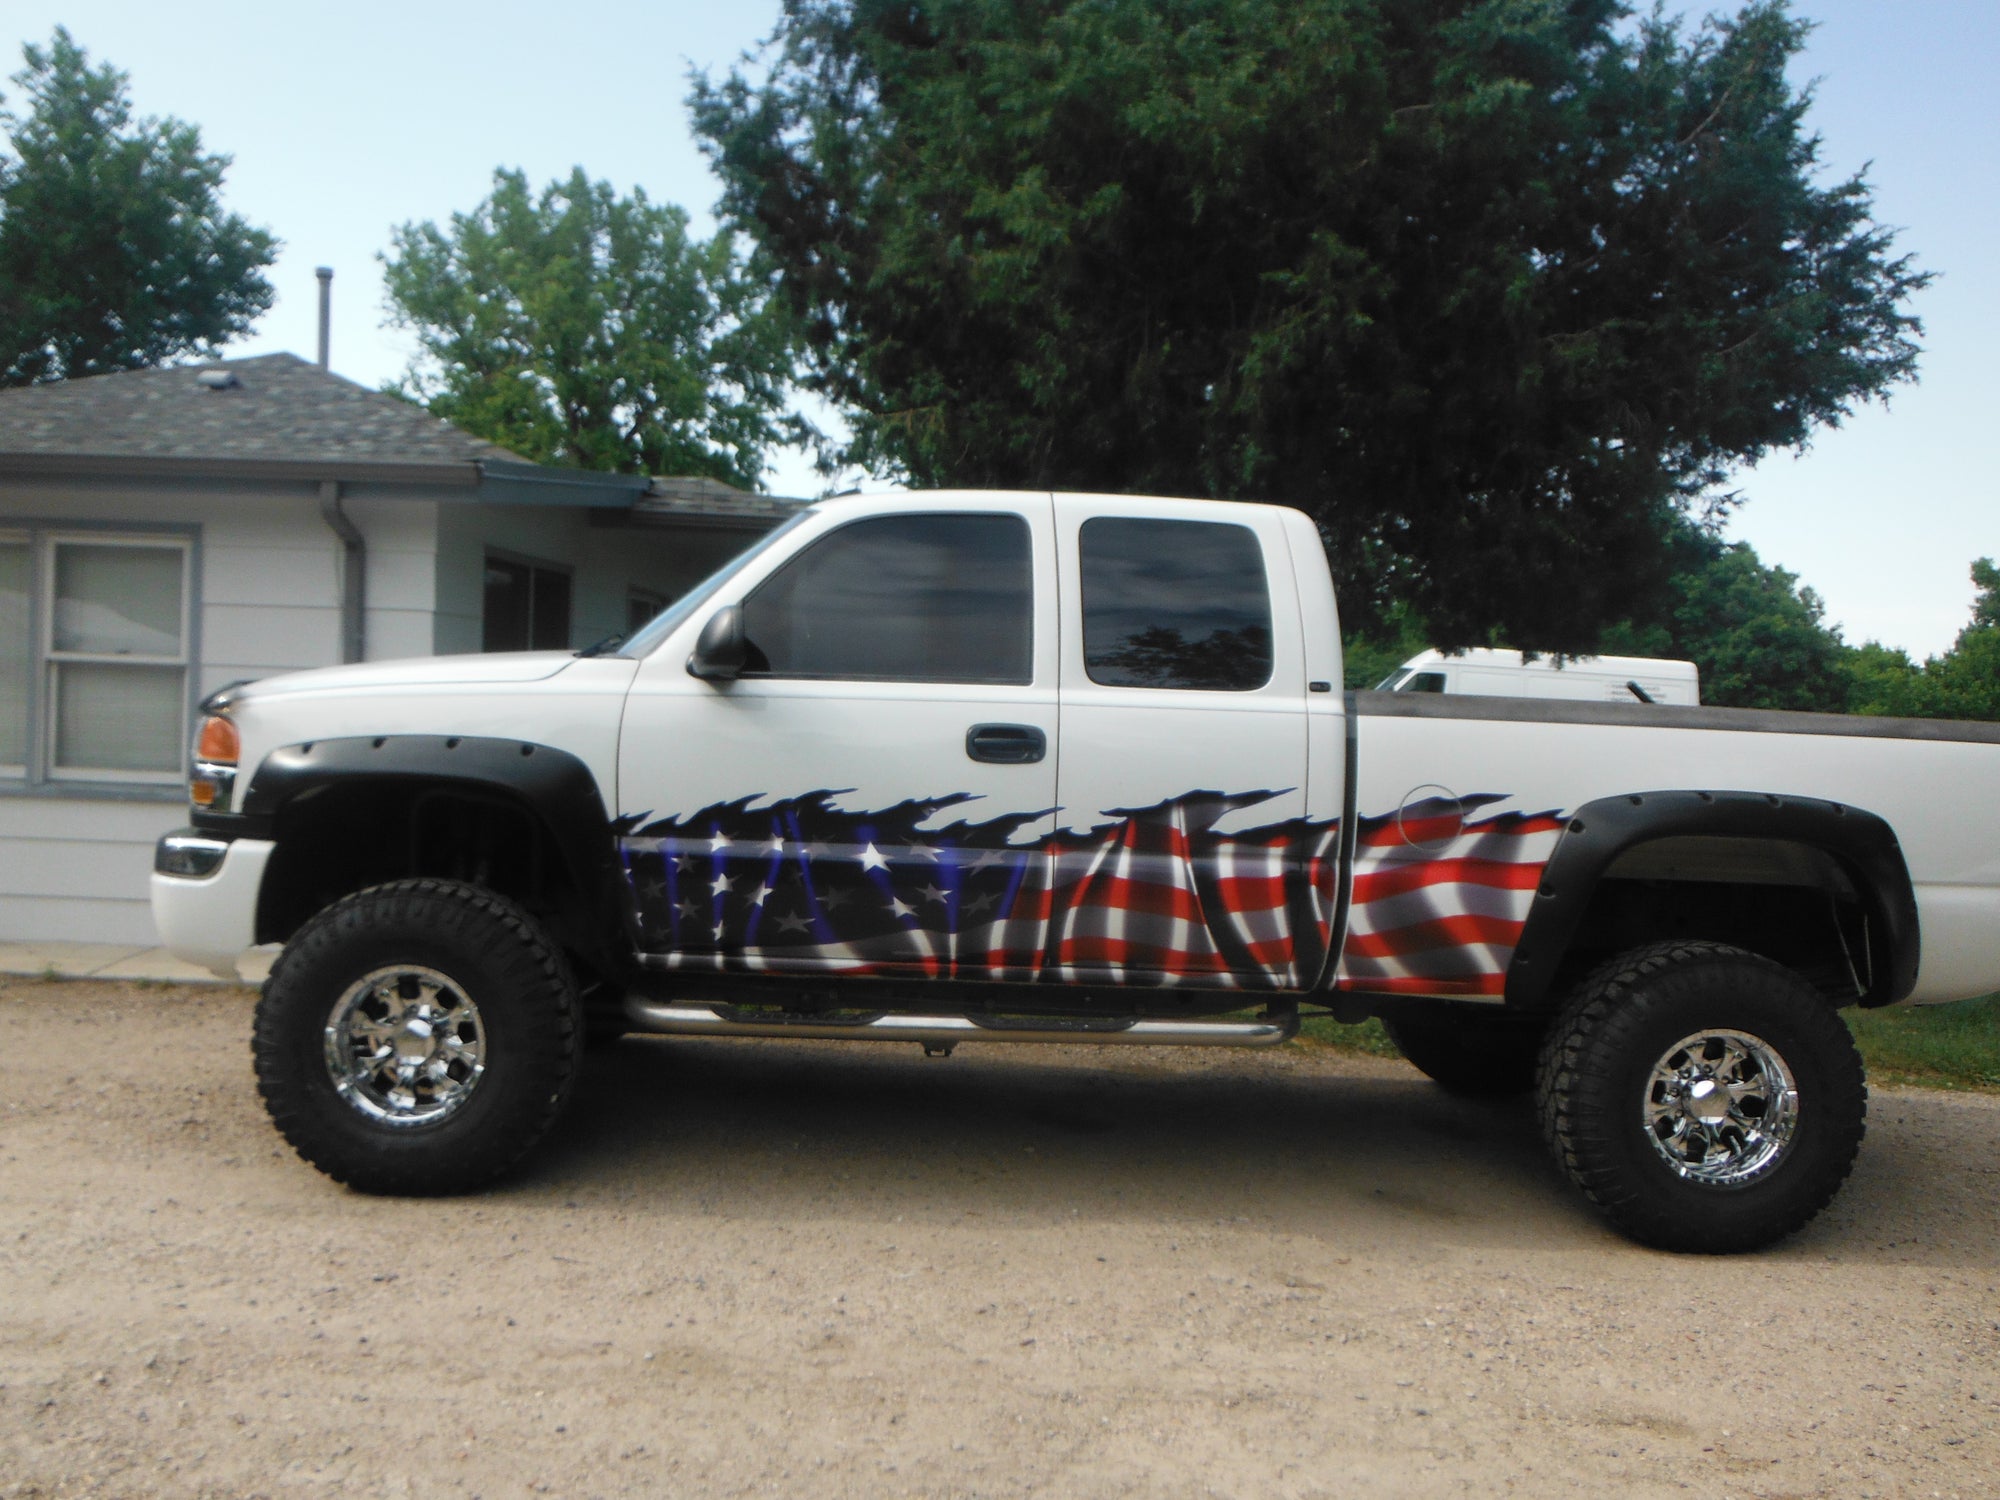 american flag truck wrap on white pick-up truck